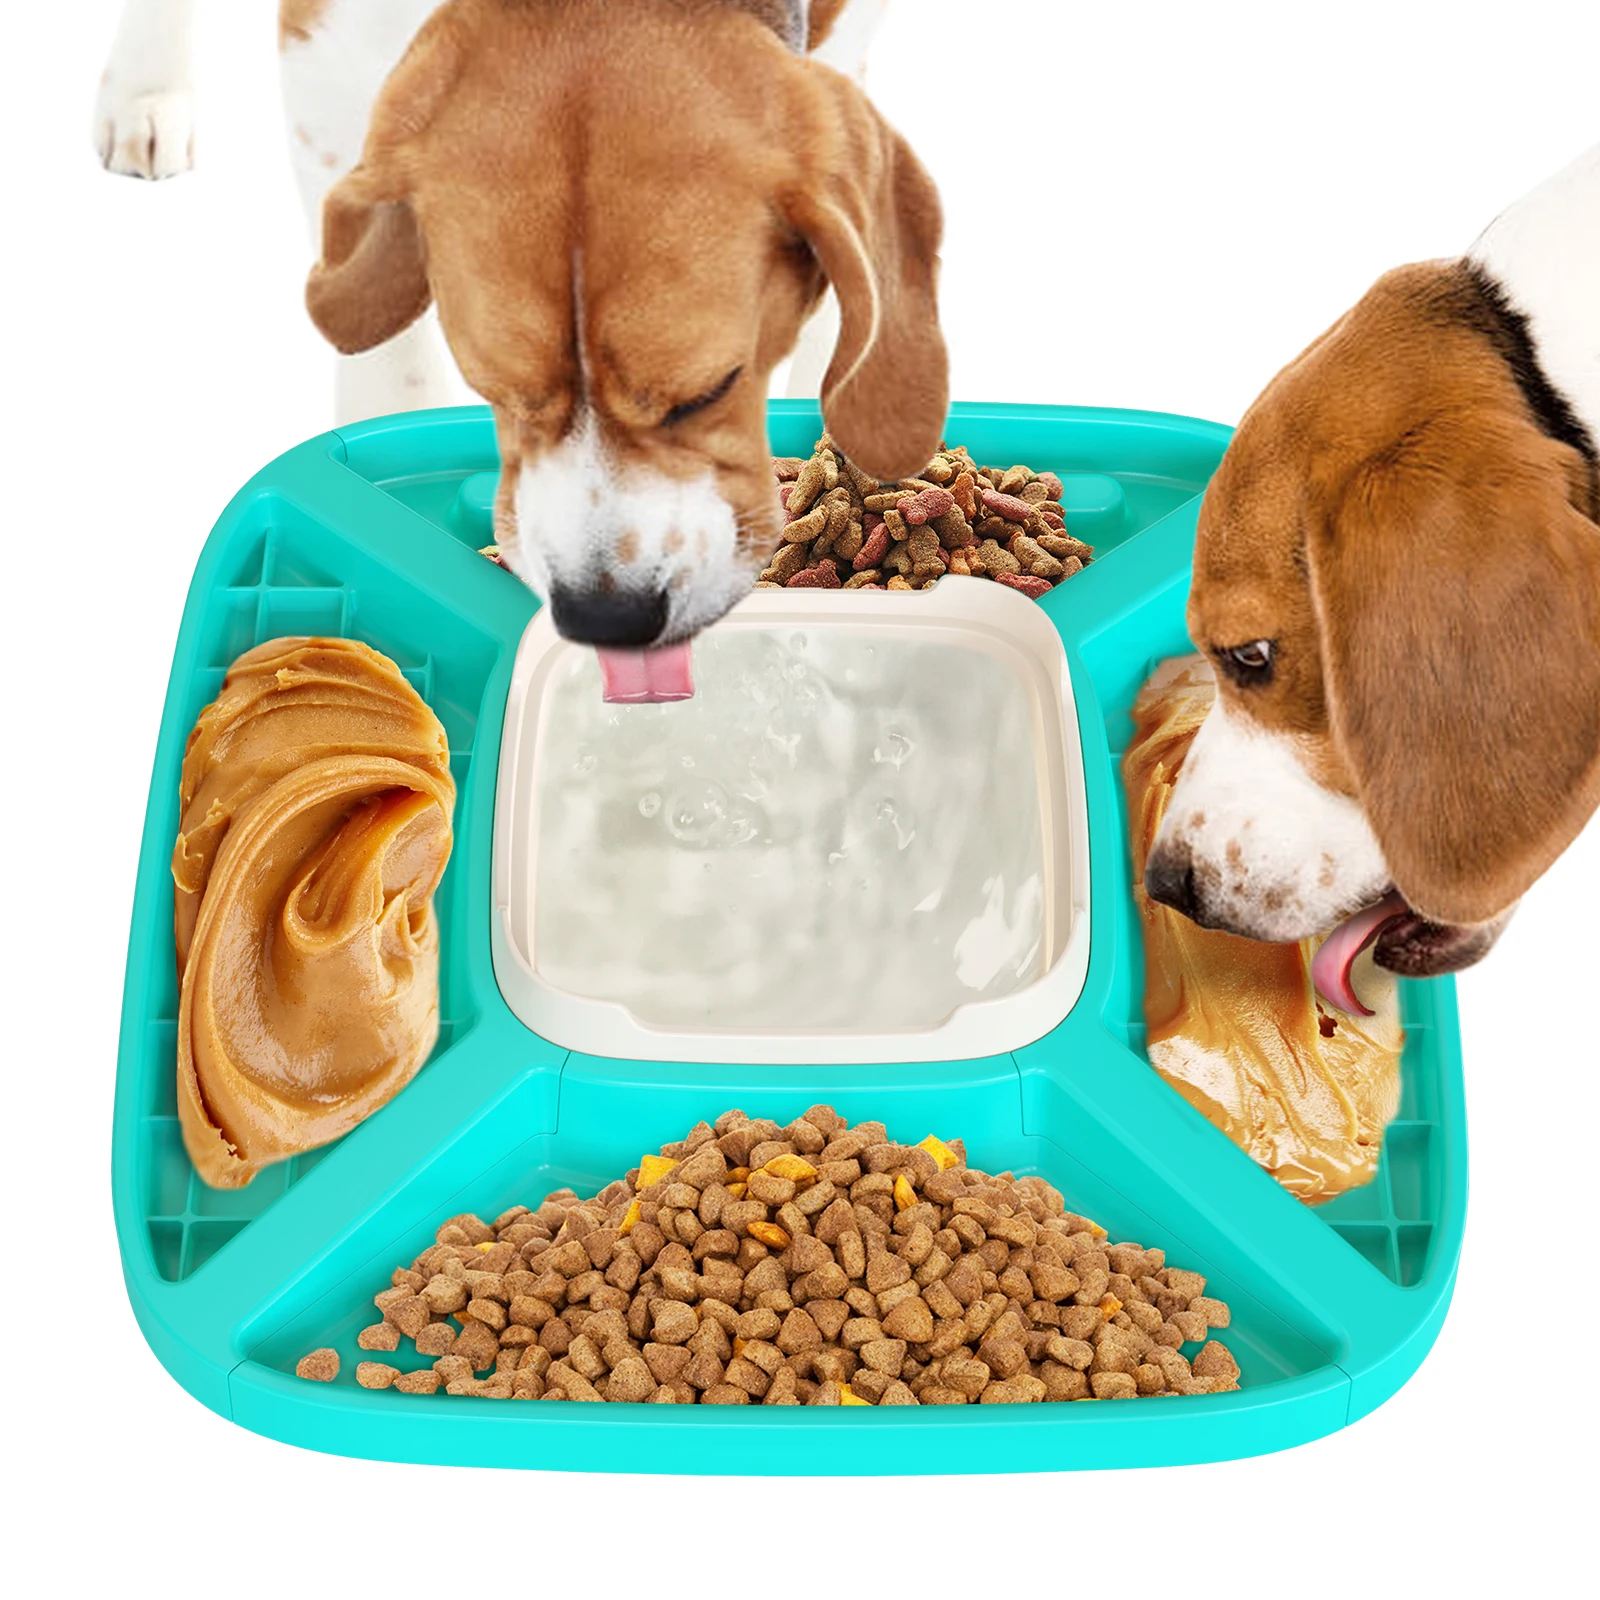 

Amazon Hot selling 5 in 1 Food Grade BPA free ABS Pet Dog Water Bowl Dog Slow Feeder Lick Mat, Picture shows